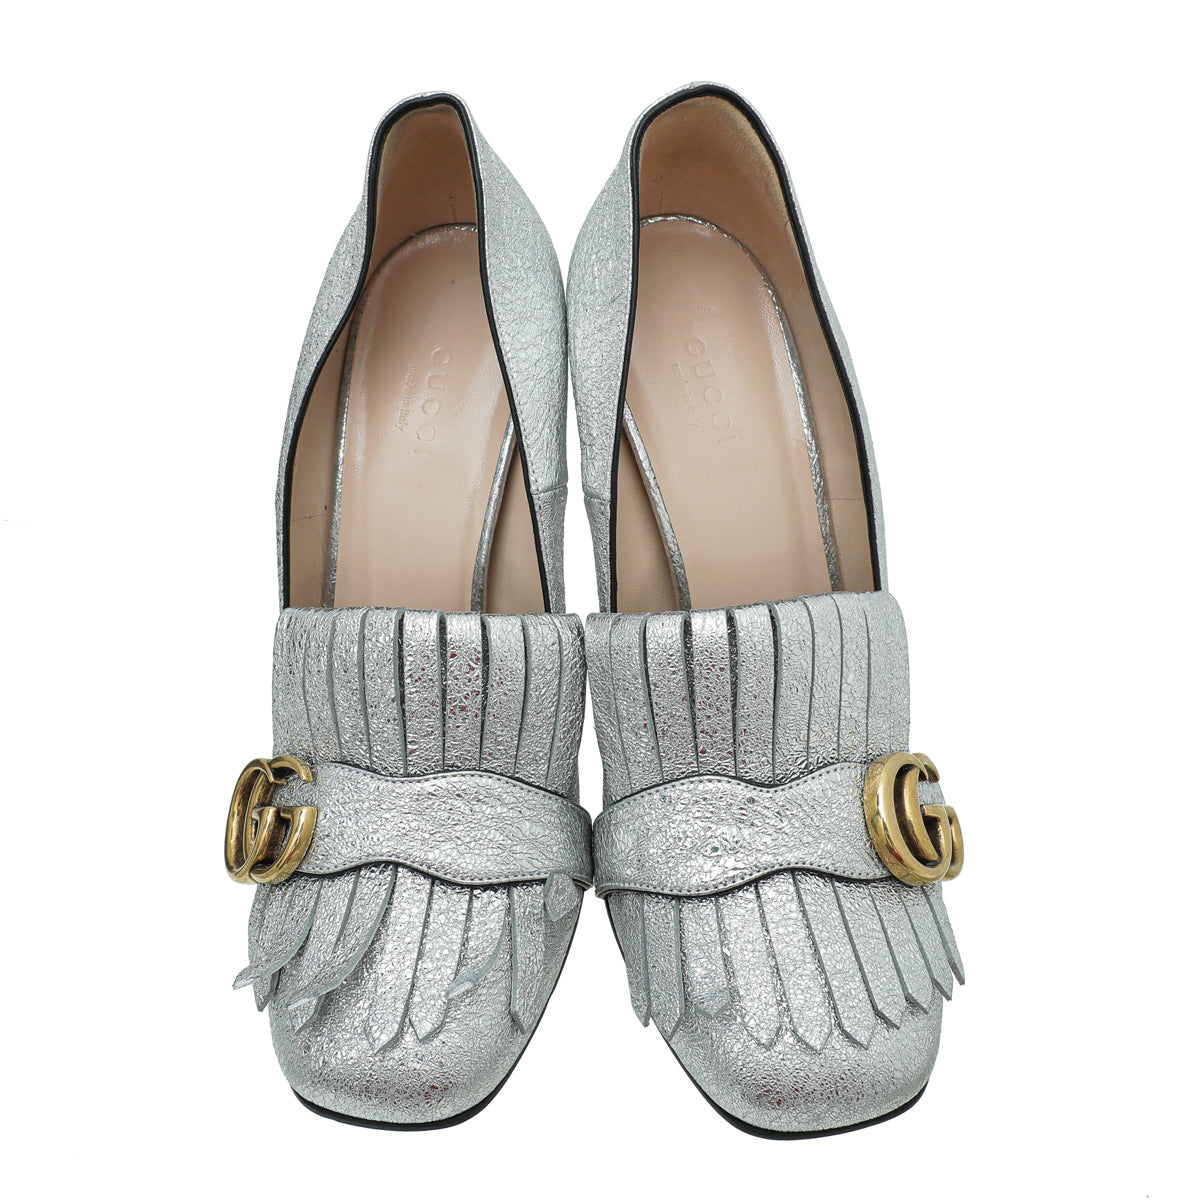 Gucci Silver Metallic Laminate GG Marmont Fringe Loafers Pumps 38